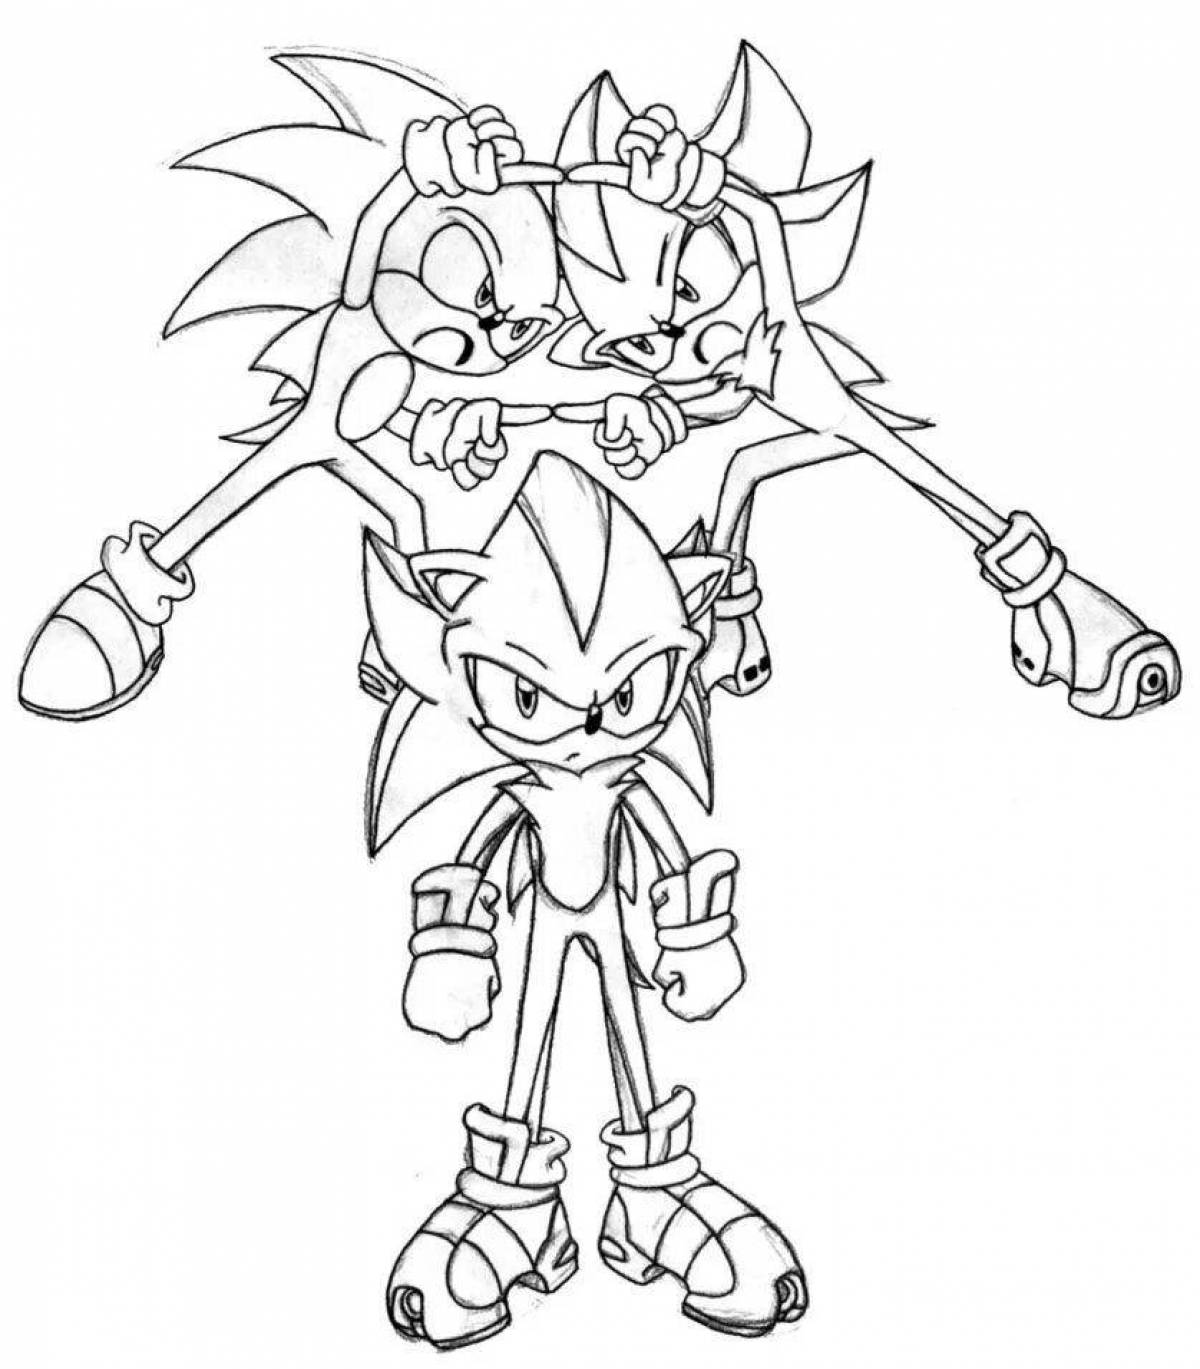 Grand excalibur sonic coloring page